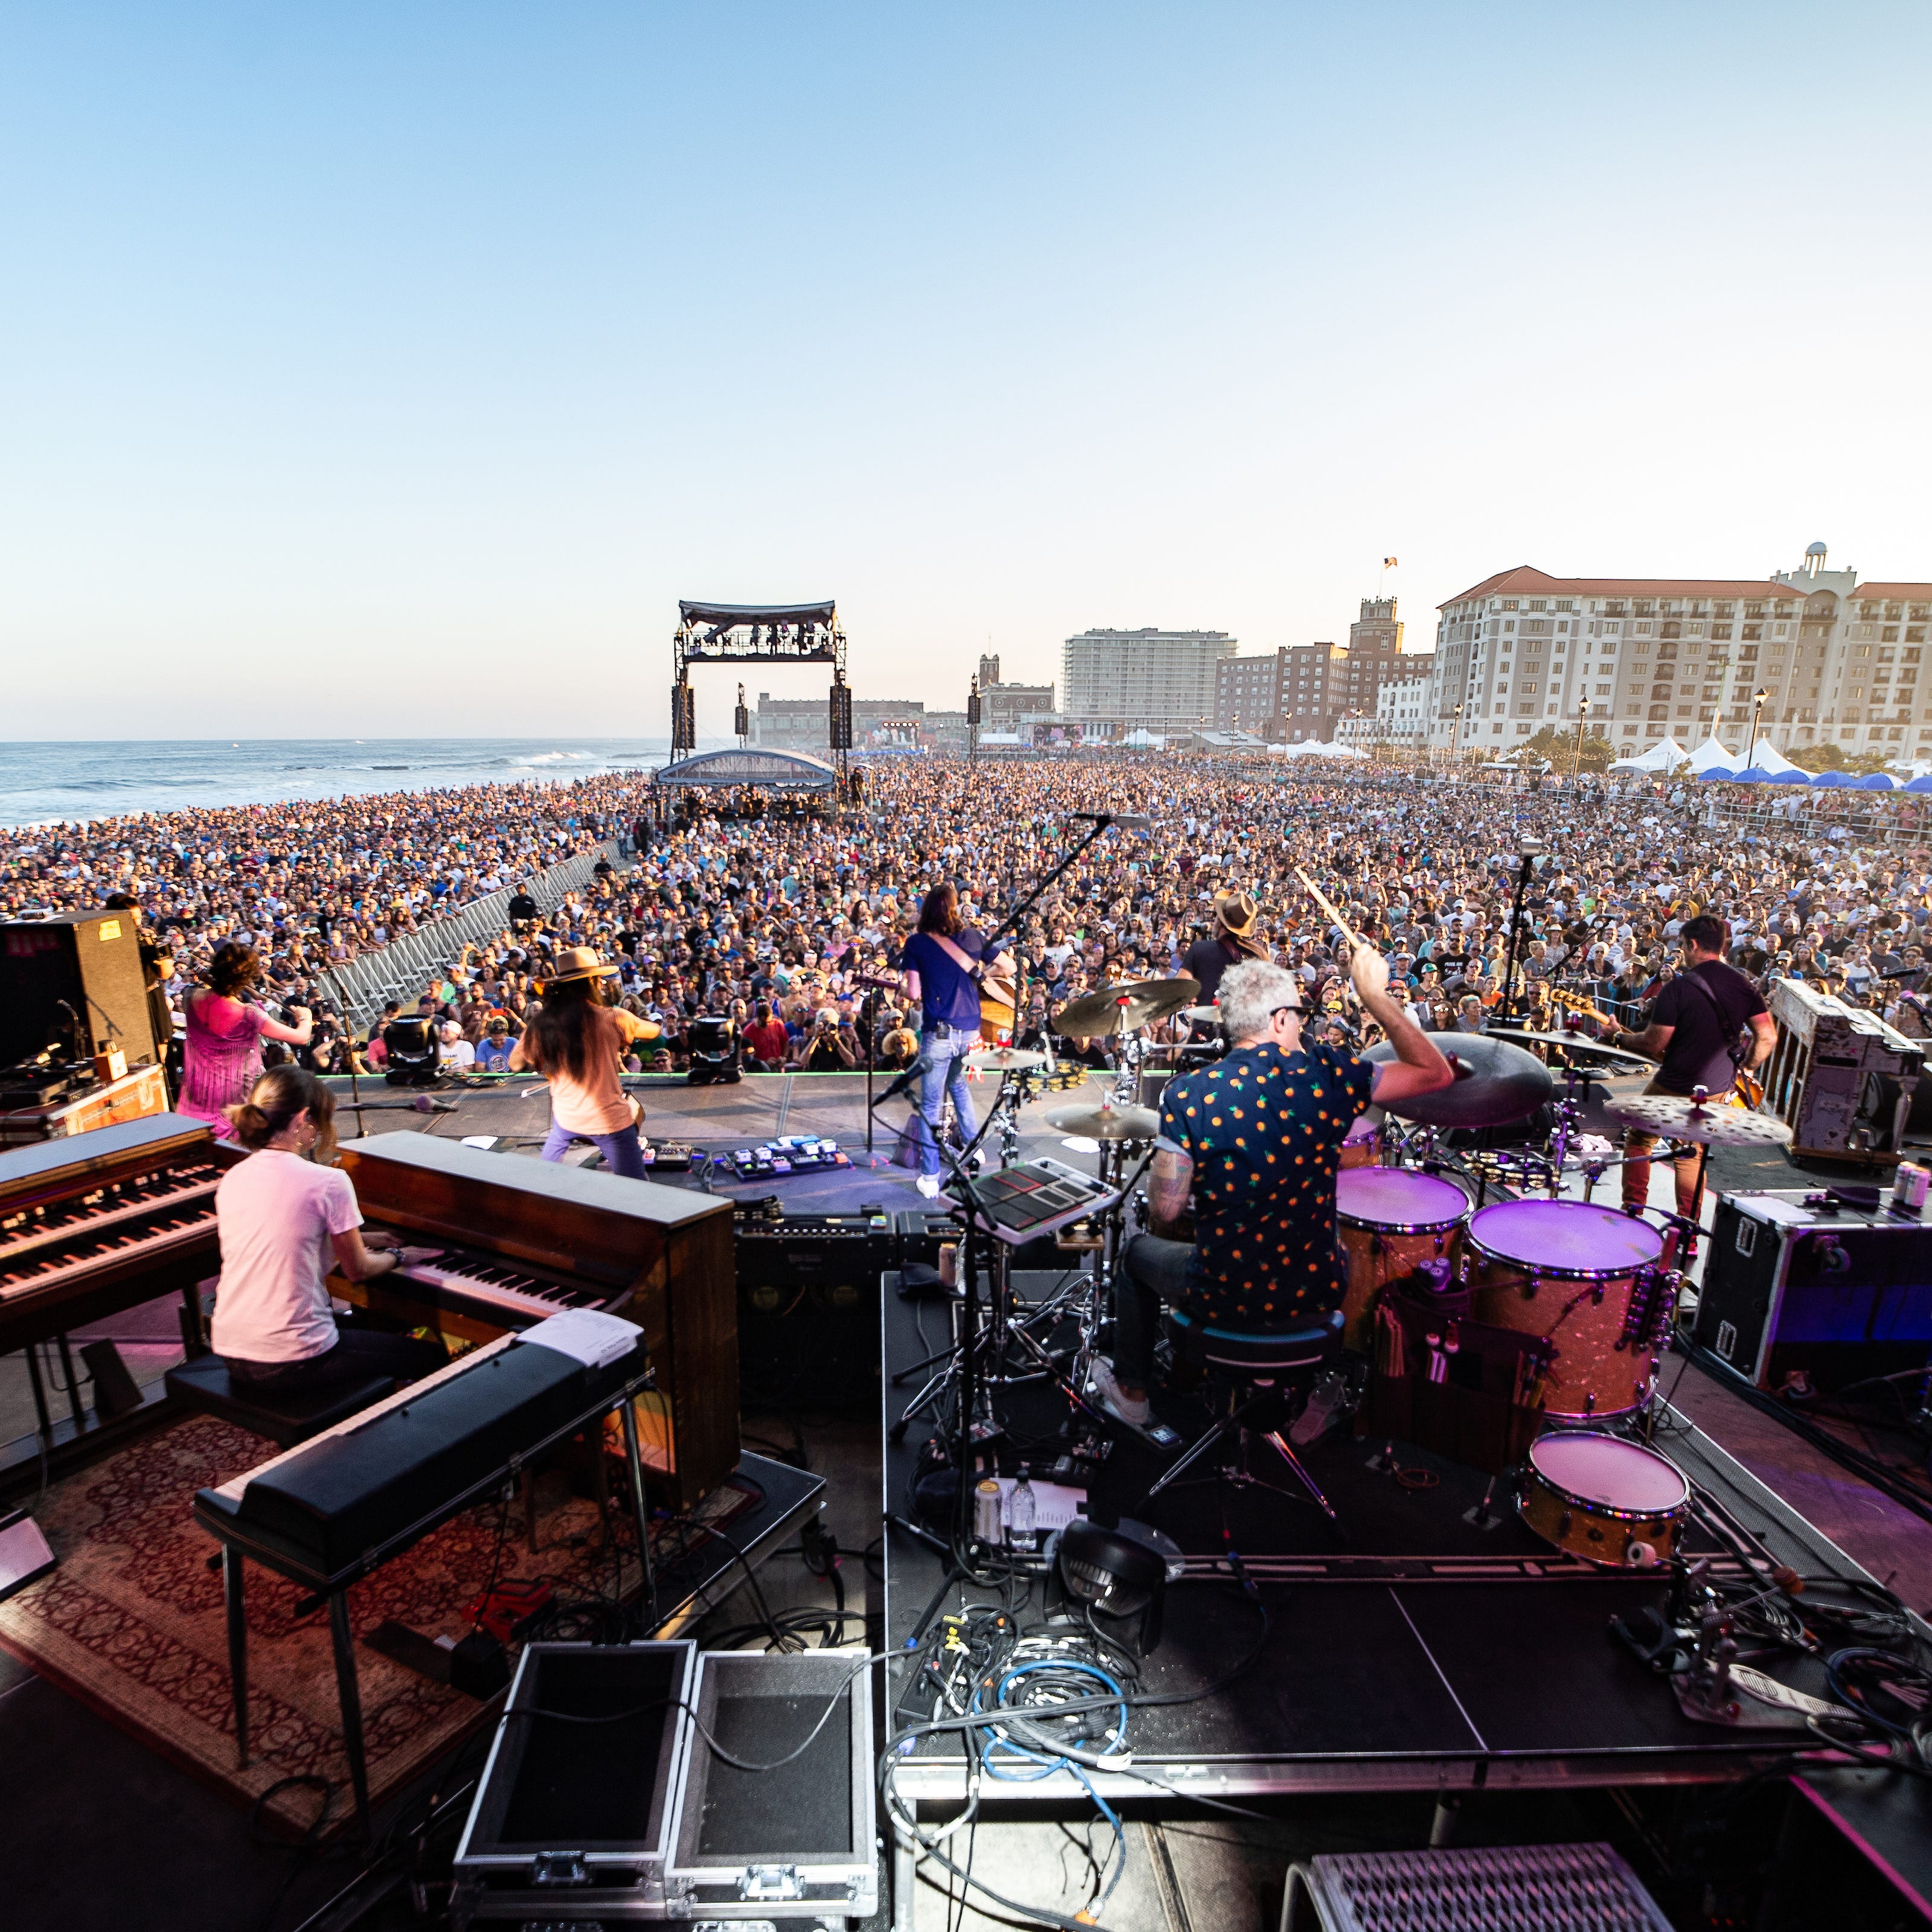 Daily Briefing: Bamboozle music festival in Atlantic City canceled